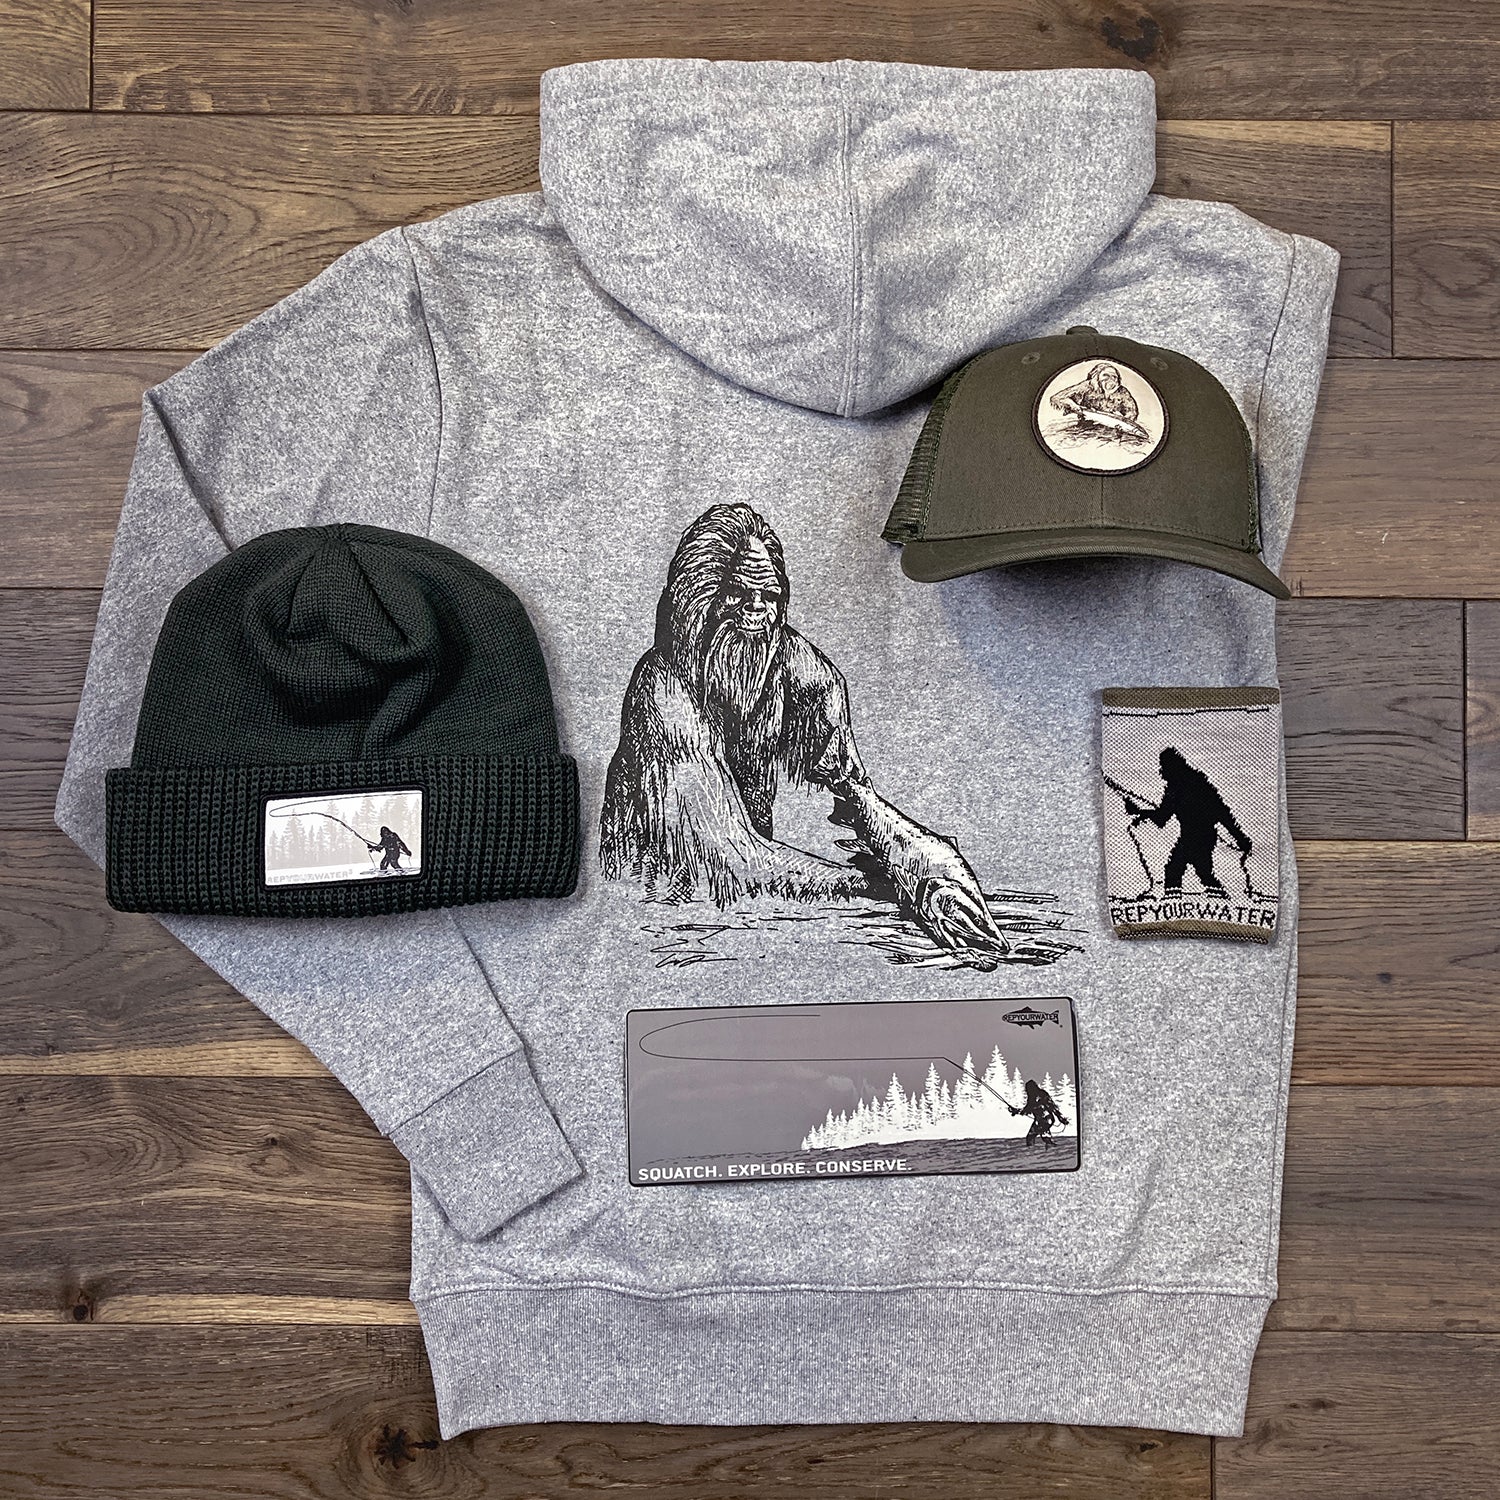 A knit hat, brimmed hat, hooded sweatshirt, can cooler, and sticker laid out on a wood floor.